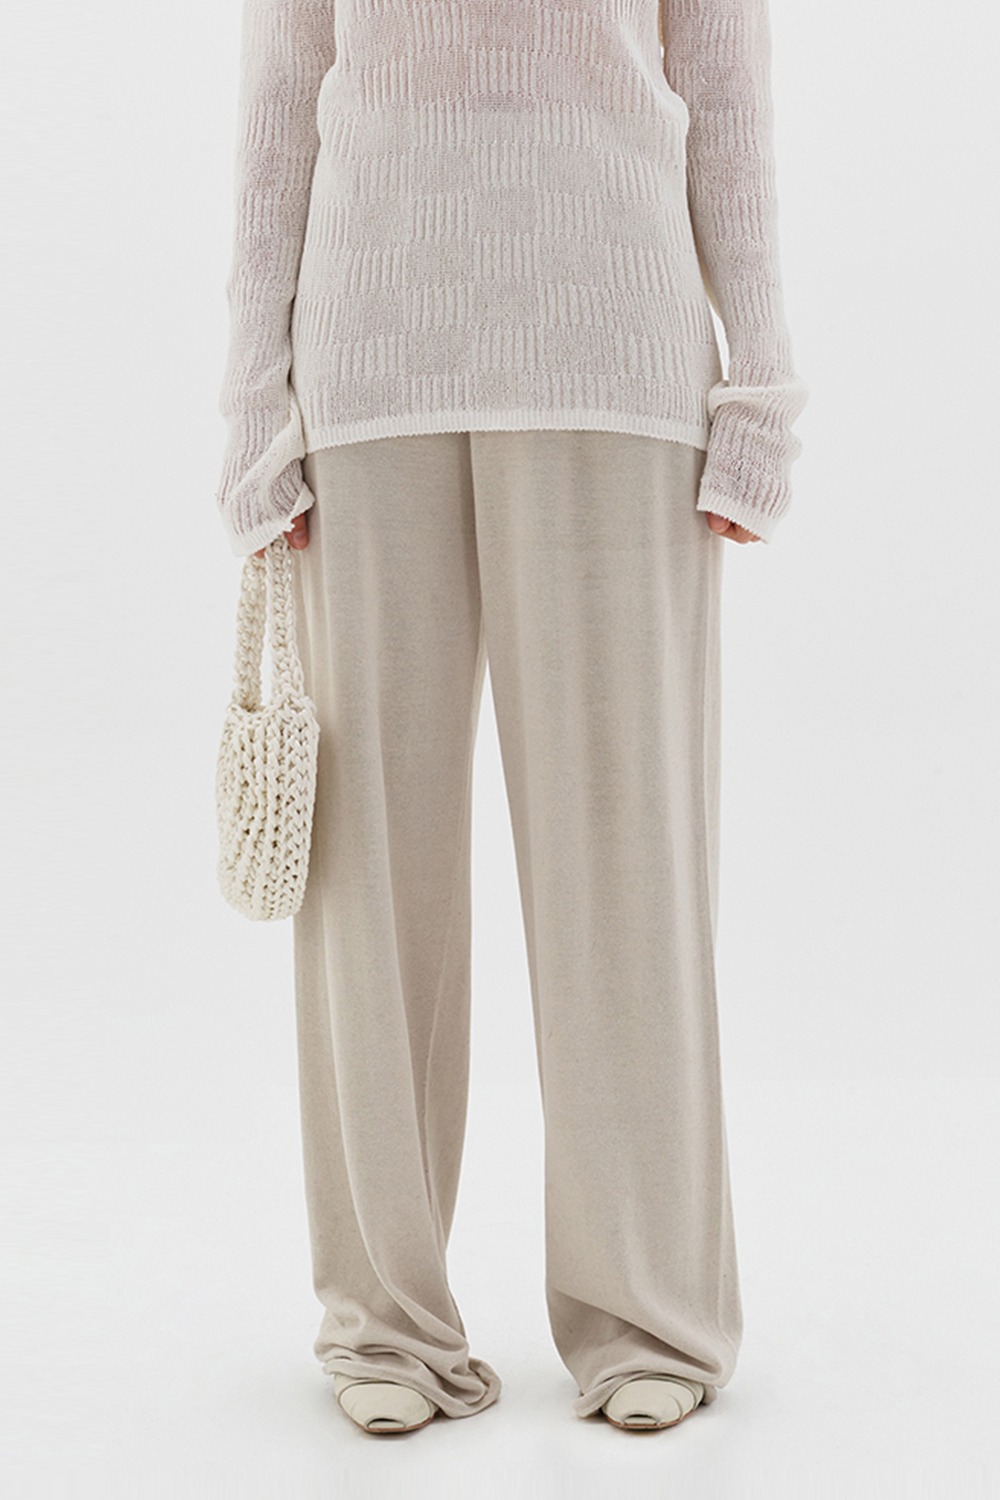 SEE-THROUGH KNIT PANTS - BEIGE